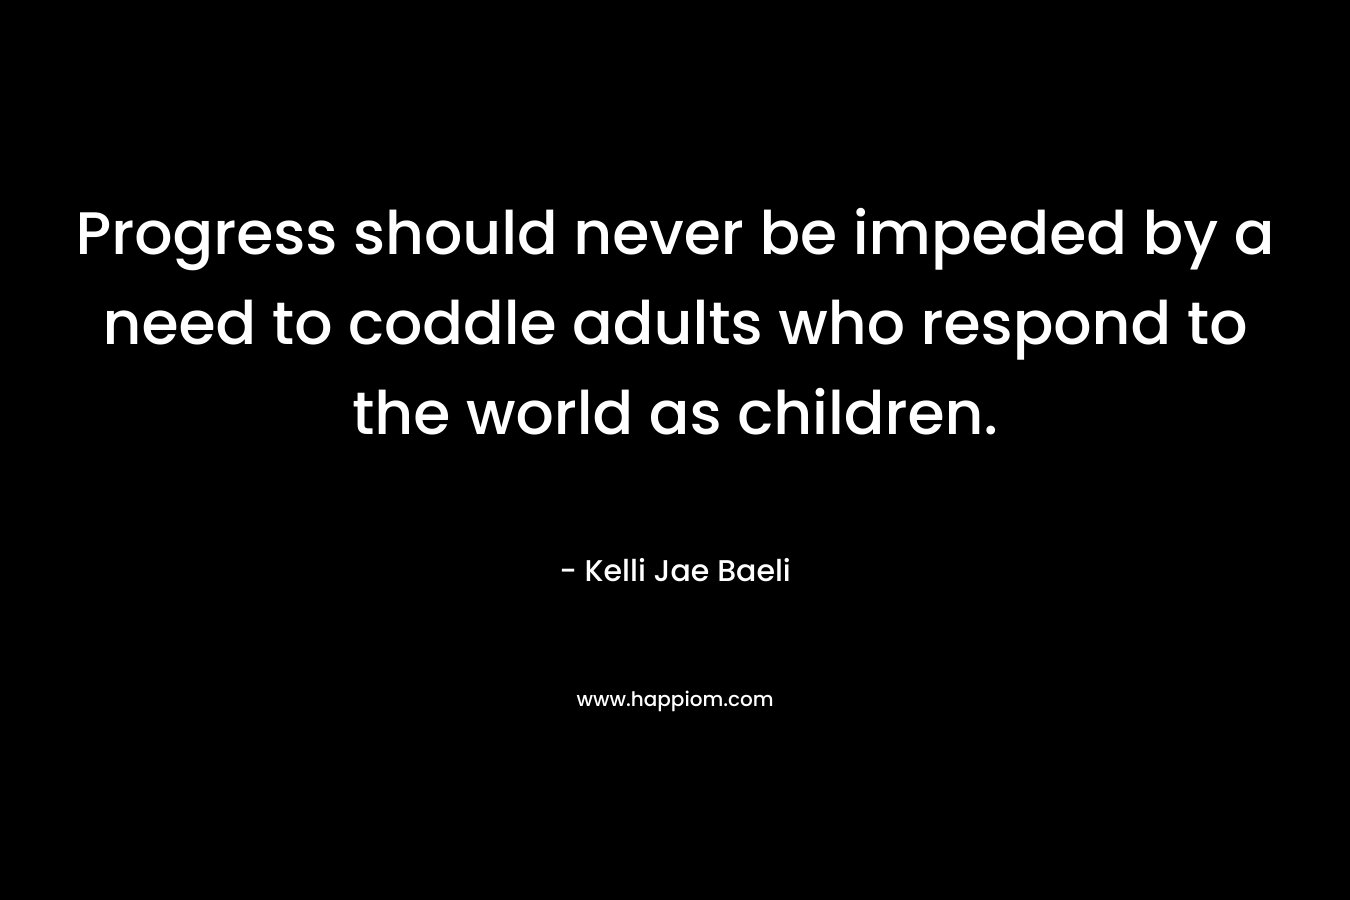 Progress should never be impeded by a need to coddle adults who respond to the world as children. – Kelli Jae Baeli